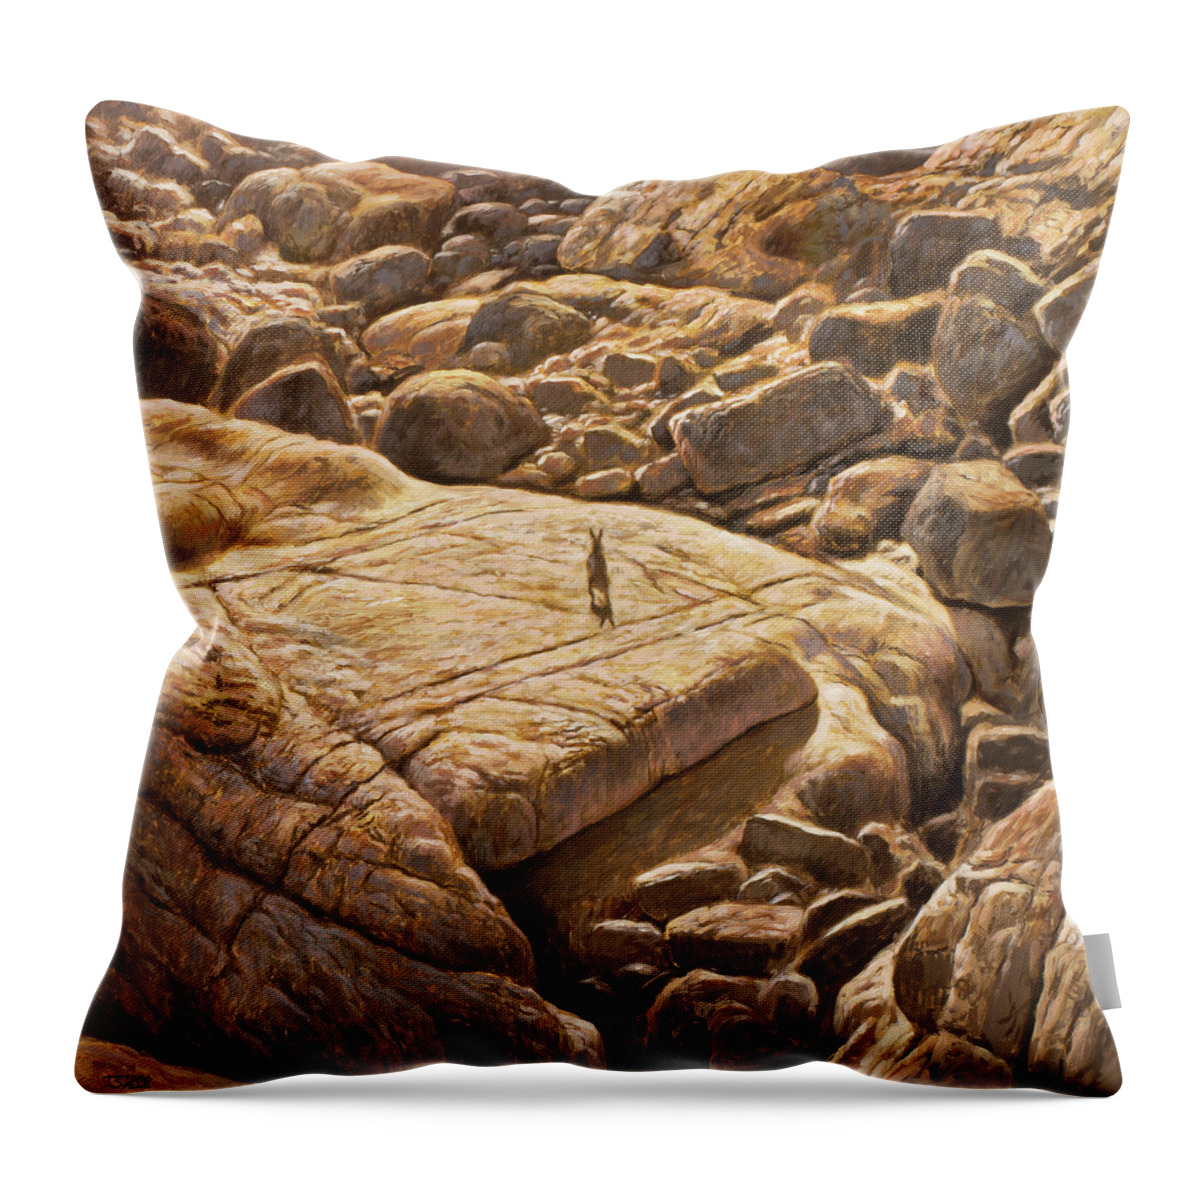 Hans Egil Saele Throw Pillow featuring the painting The Hare by Hans Egil Saele